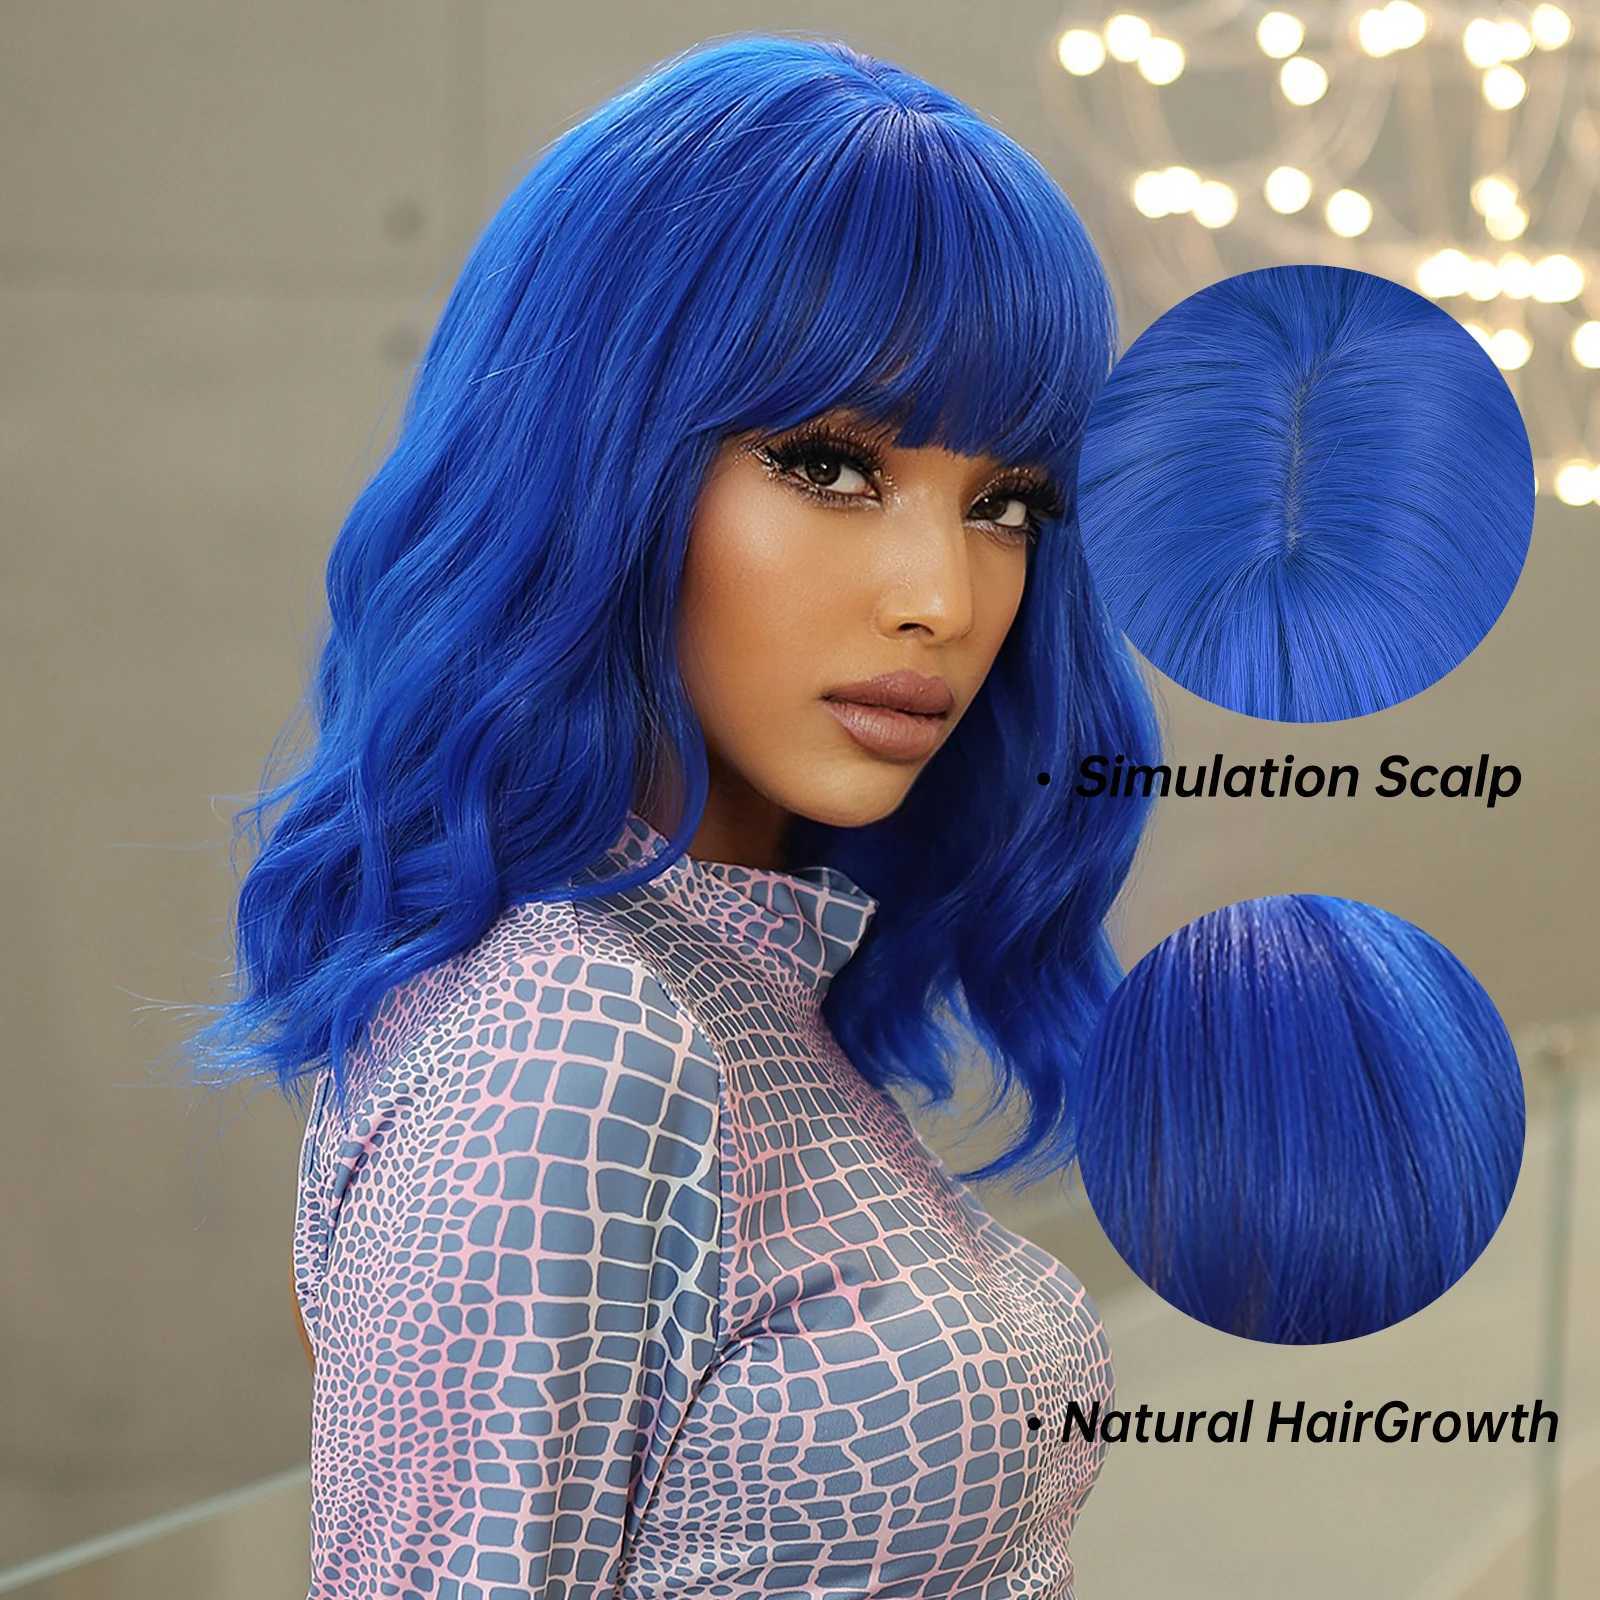 Synthetic Wigs Short Wavy Dark Blue Wig Synthetic Shoulder Long Wigs with Bangs for Women Colorful Halloween Cosplay Hair Wig Heat Resistant 240328 240327